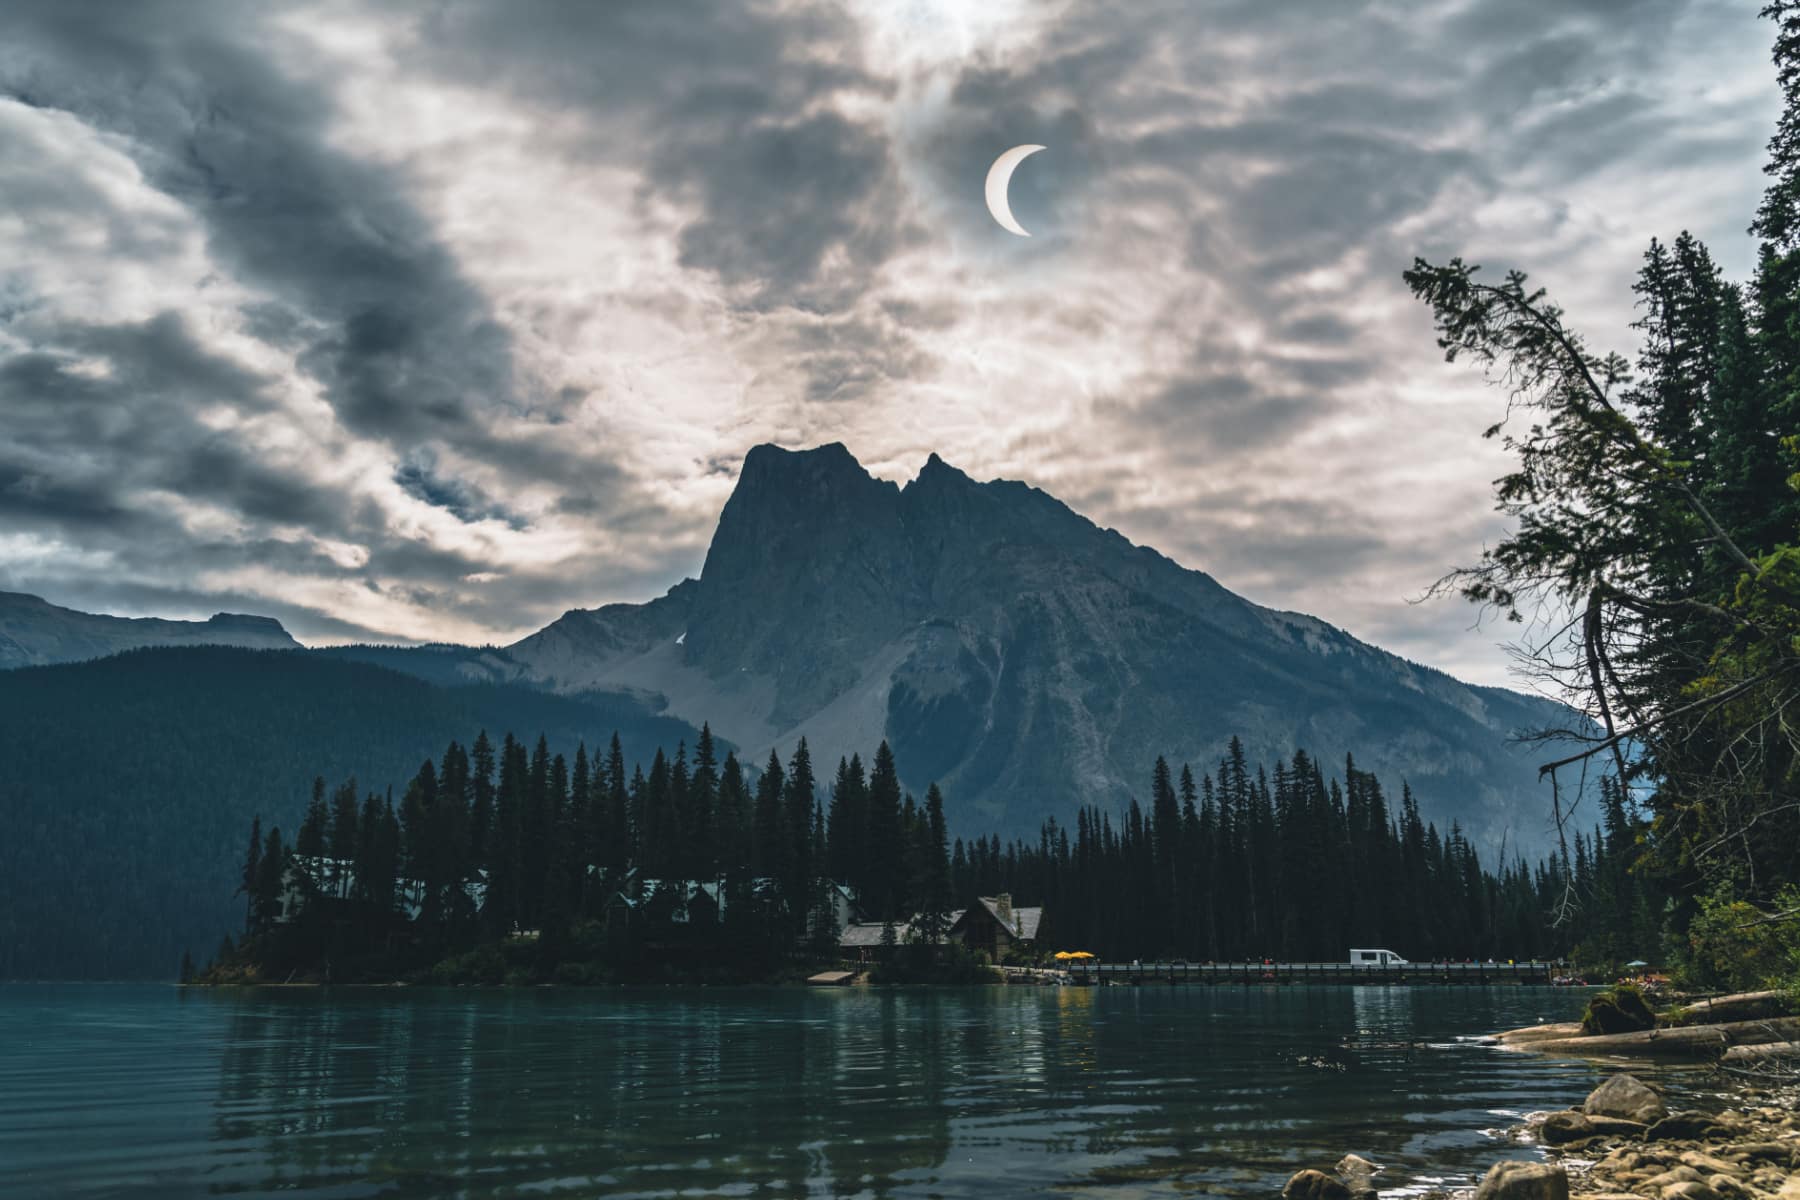 Partial eclipse hanging in the sky over mountains in Canada.